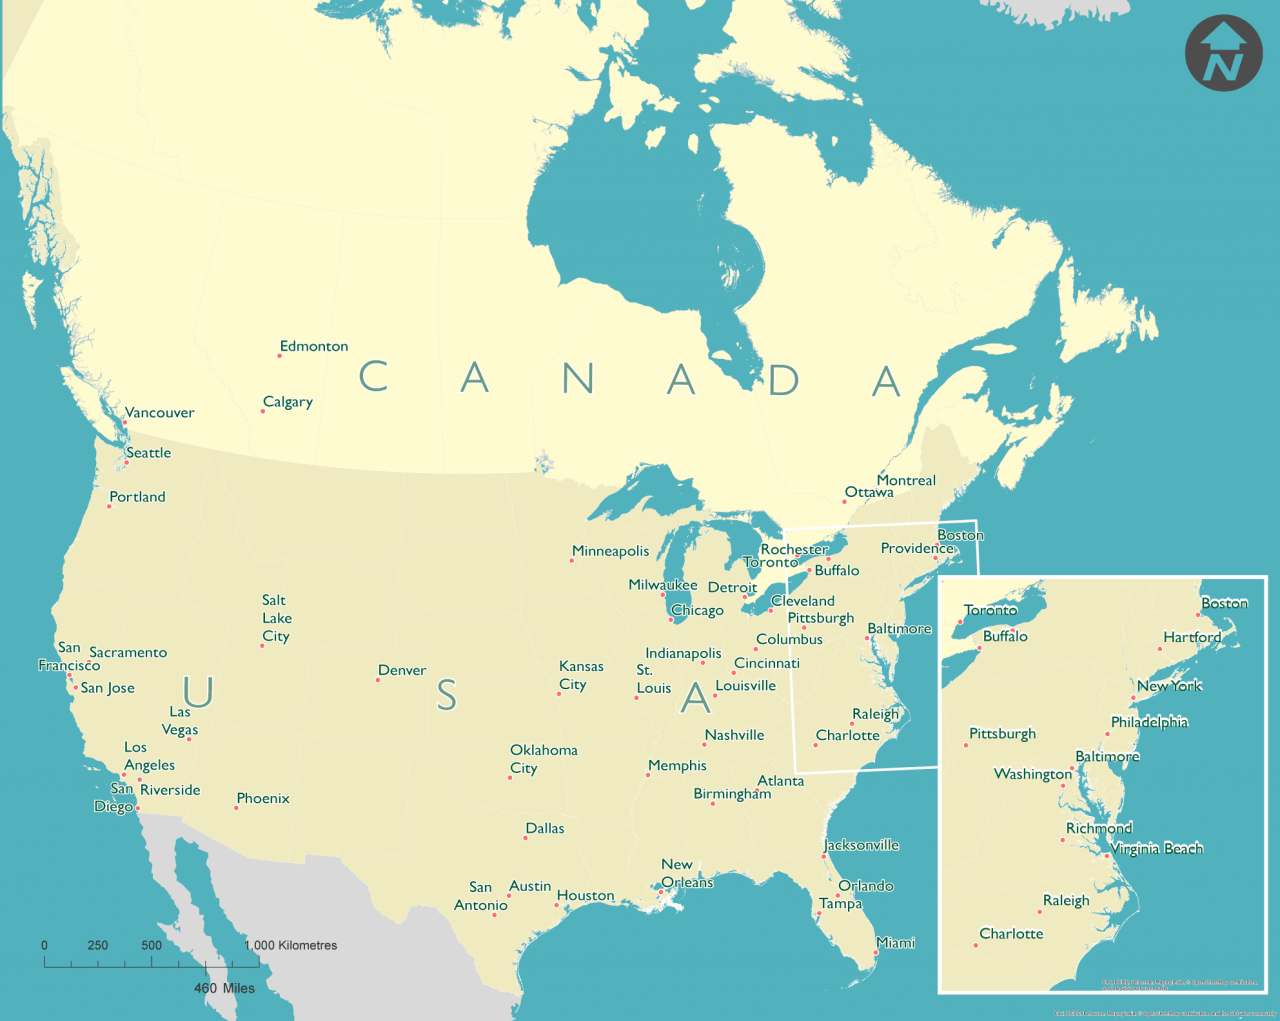 Map showing North American cities in metropolitan with population of over 1 million.